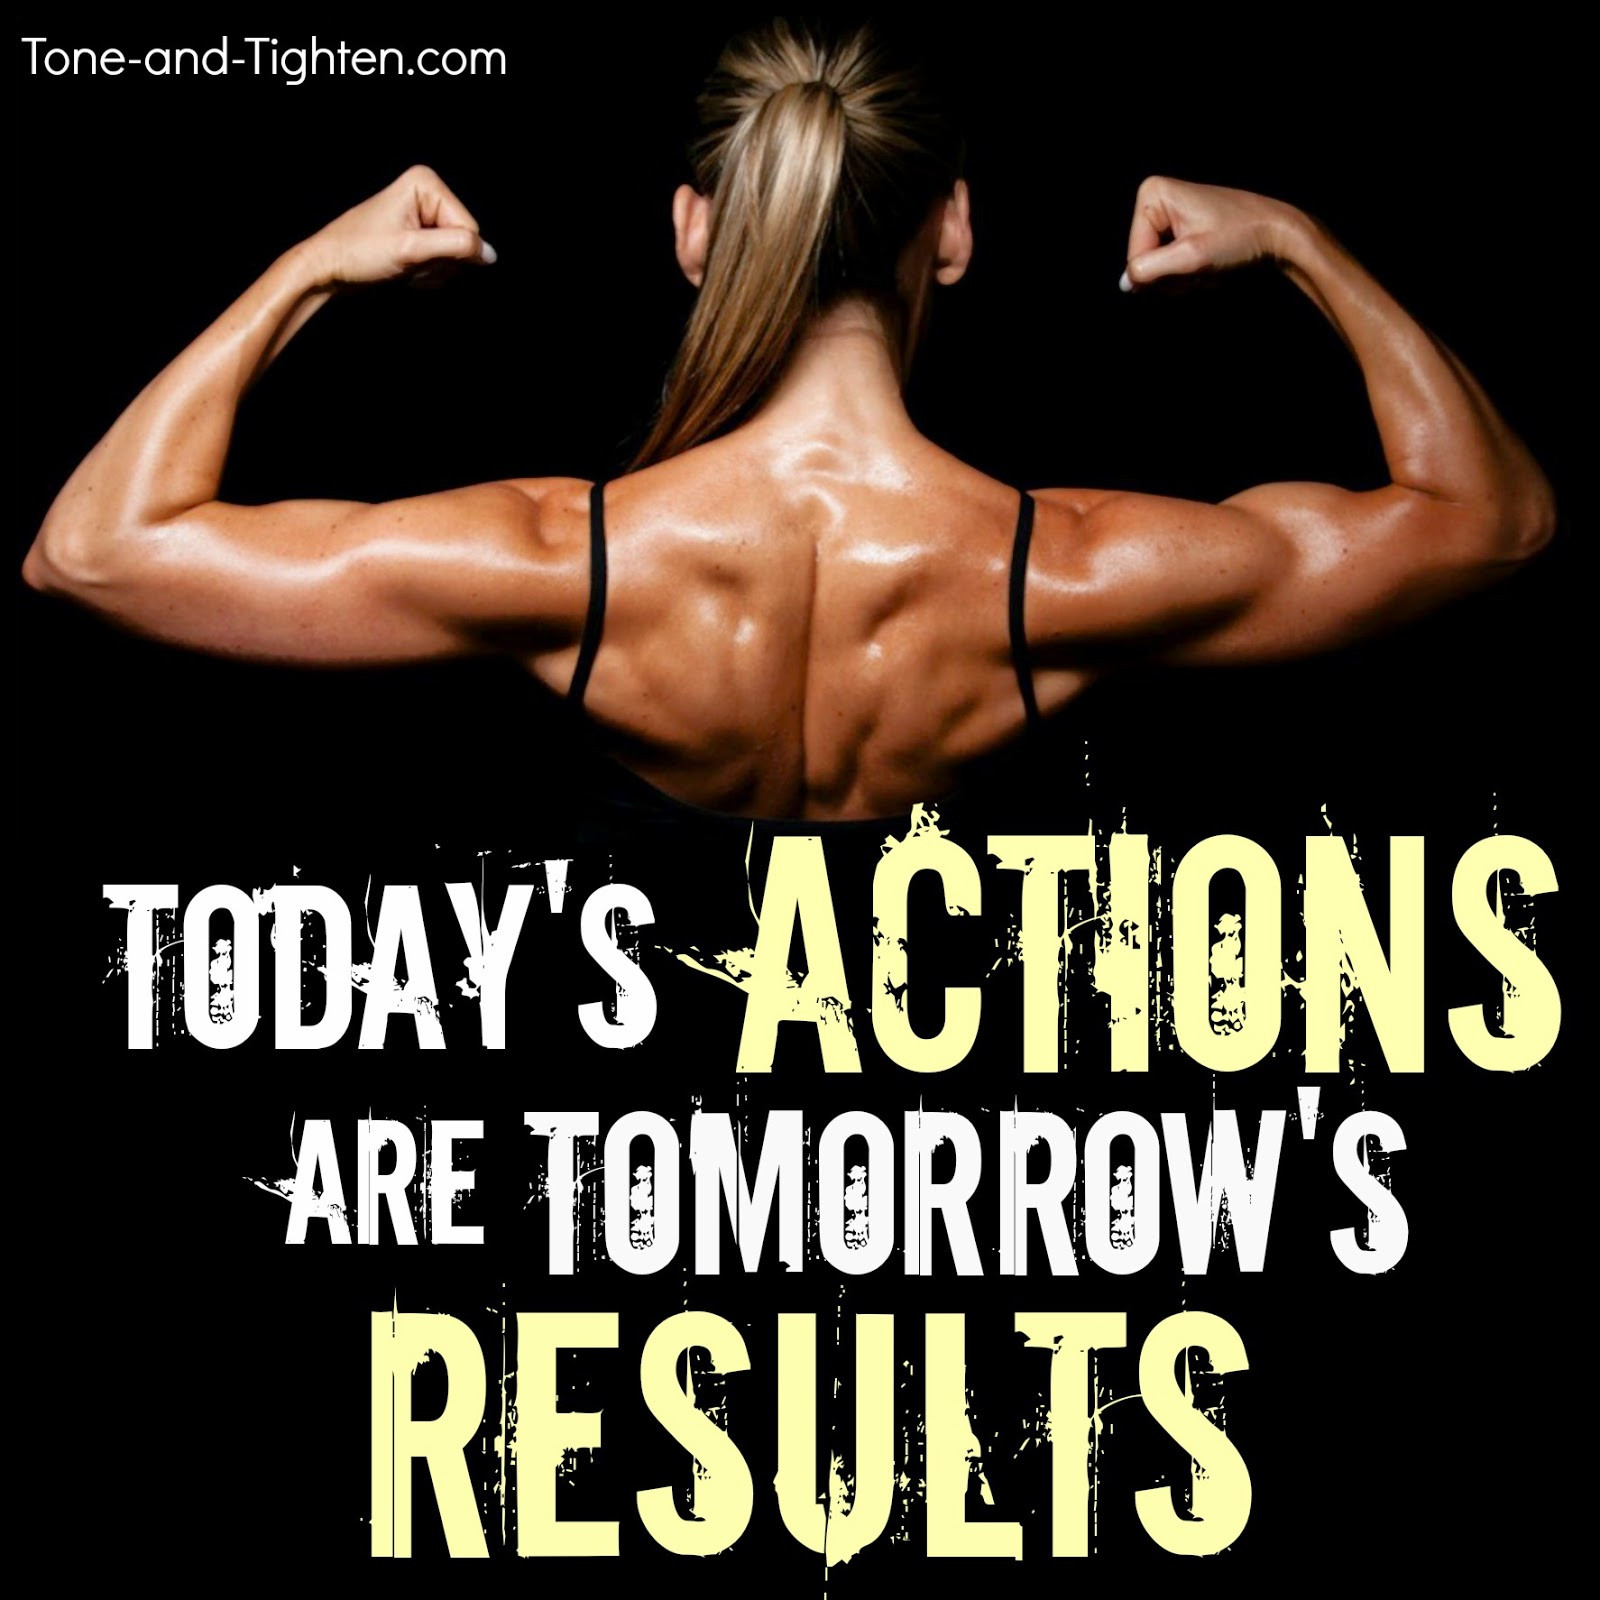 Motivational Quotes For Exercise
 Fitness Motivation – Inspirational Fitness Quote